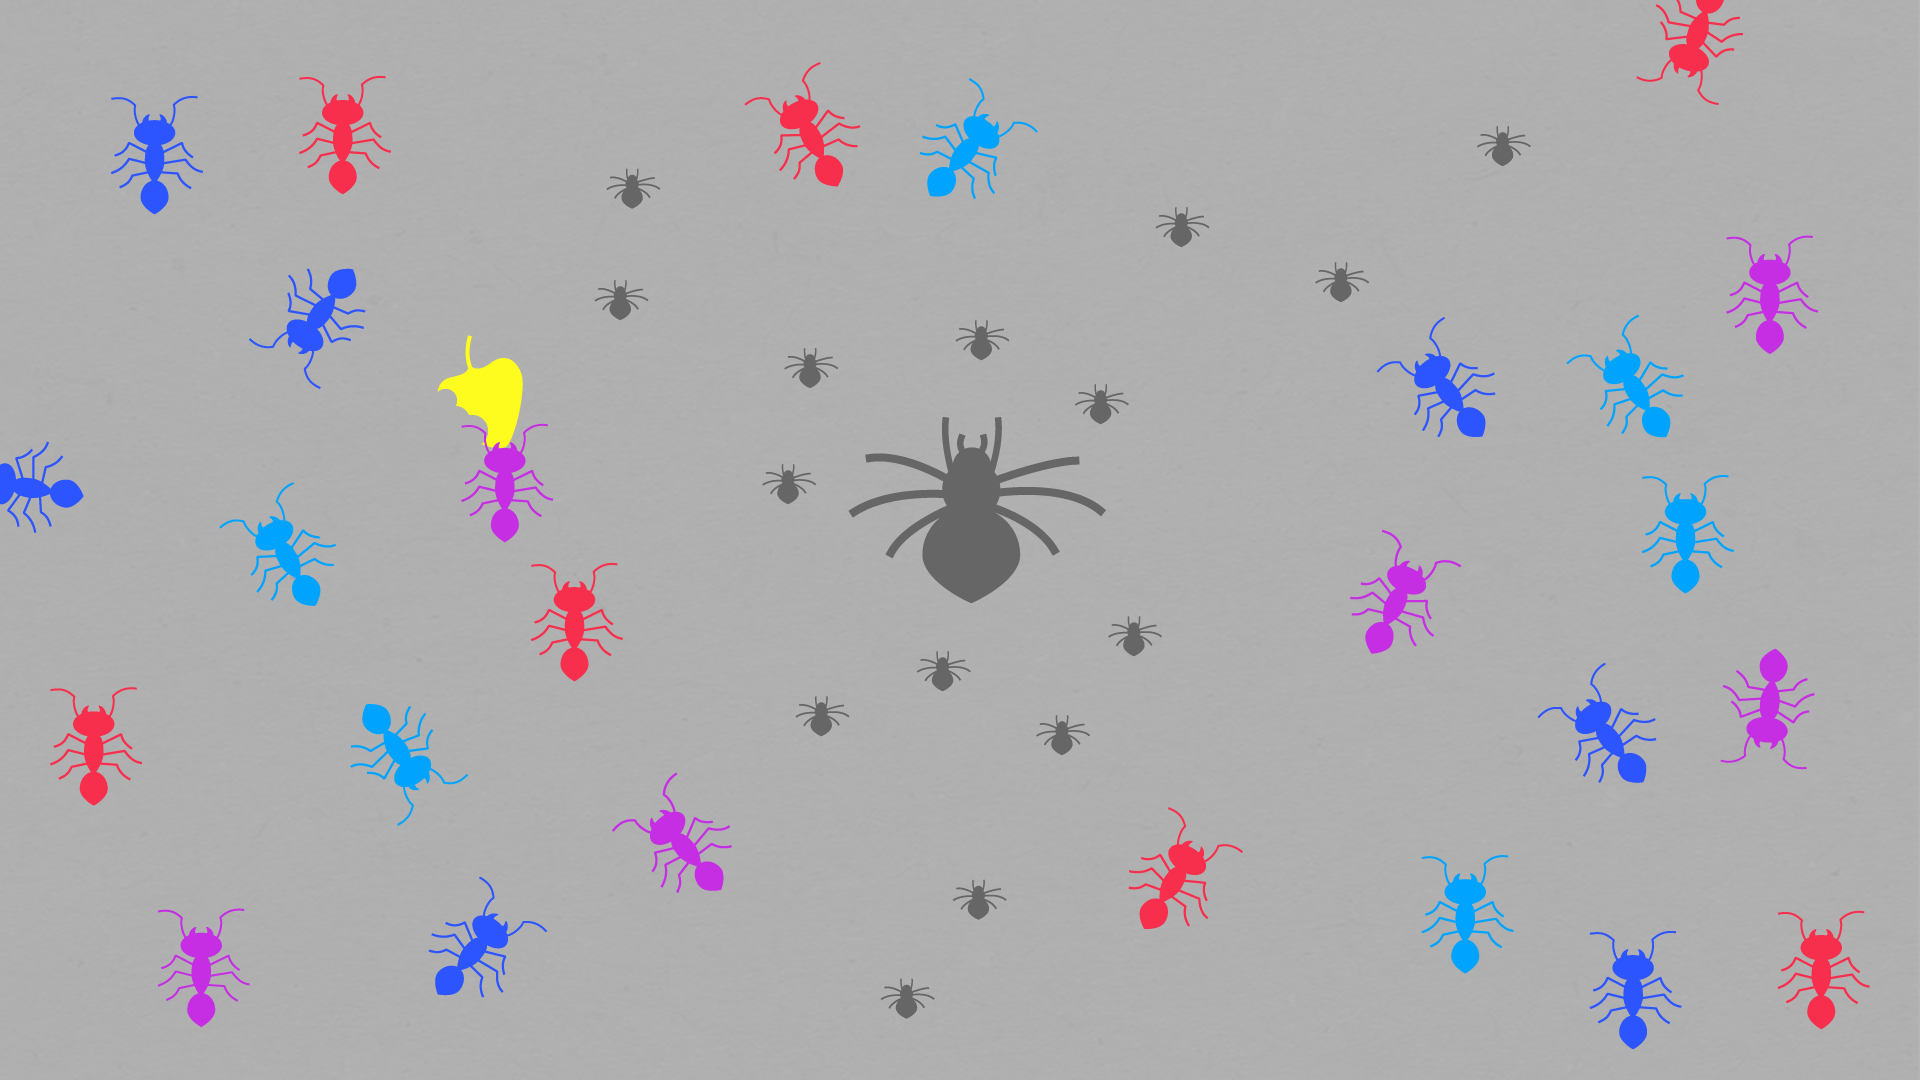 Spiders and ants